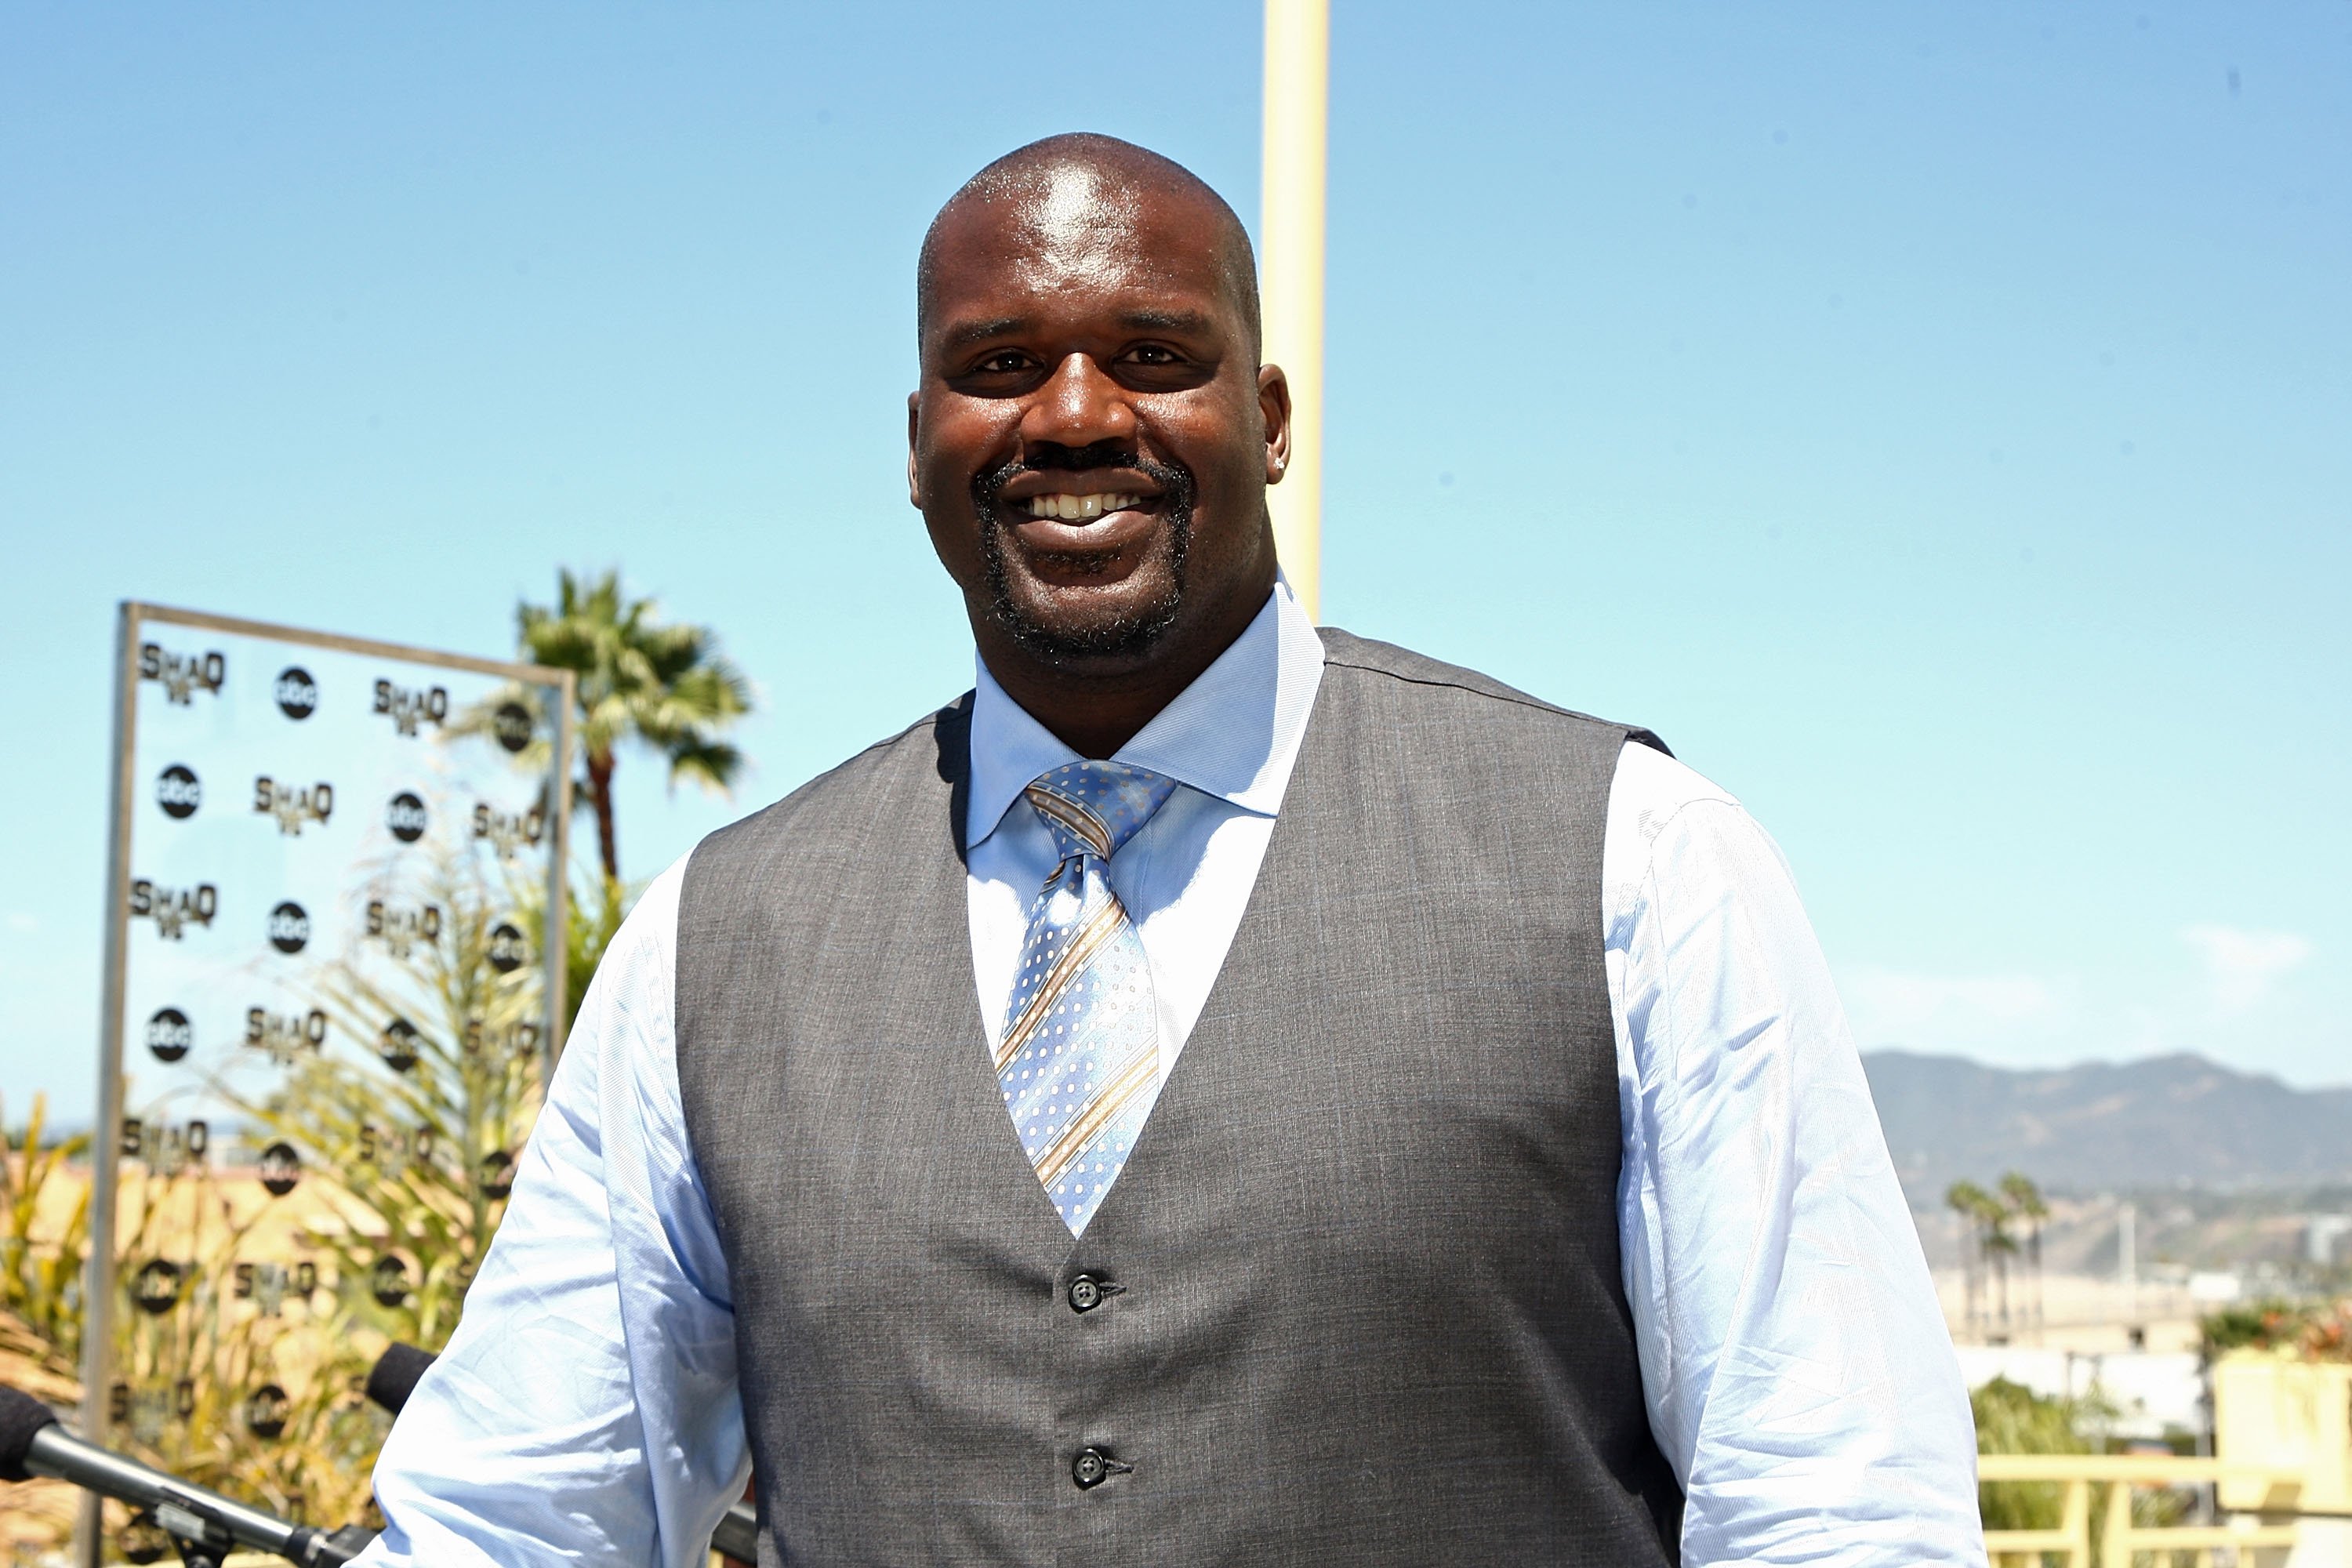 Shaquille O'Neal on August 5, 2009 in Santa Monica, California | Photo: Getty Images